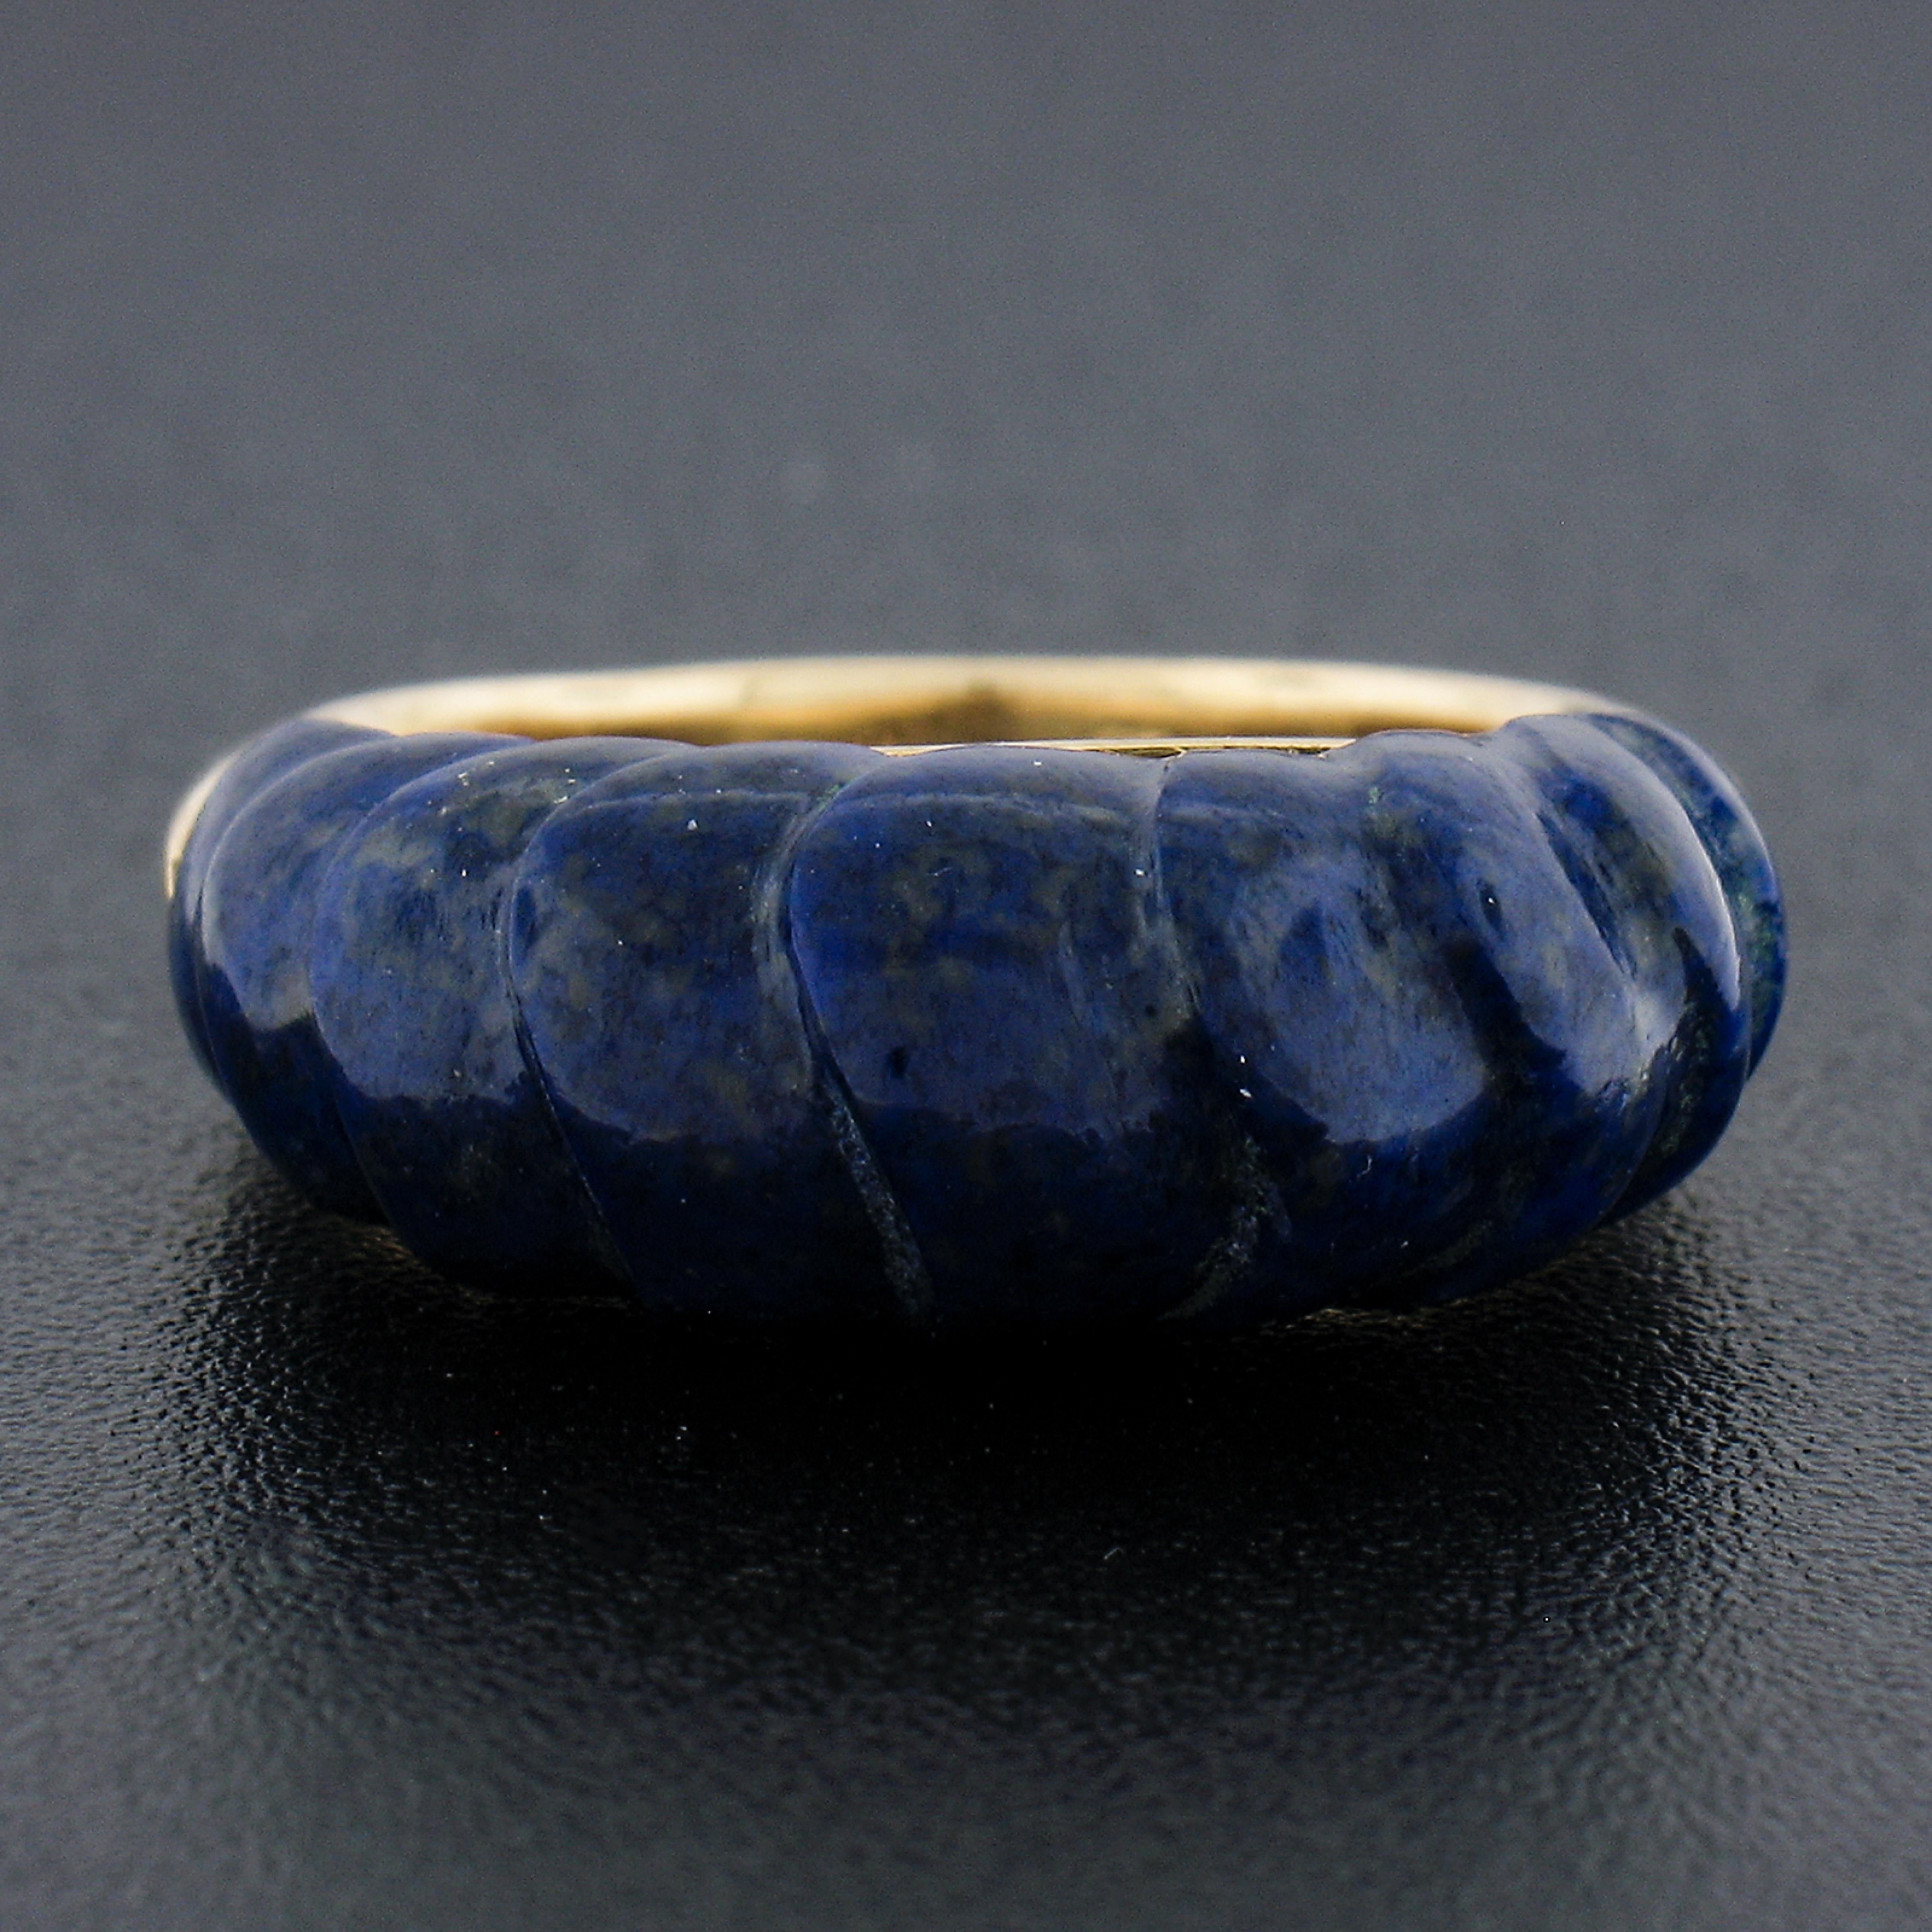 Uncut Solid 14k Yellow Gold Inlaid Carved Lapis High Dome Bombe Band Ring Size 5.5 For Sale